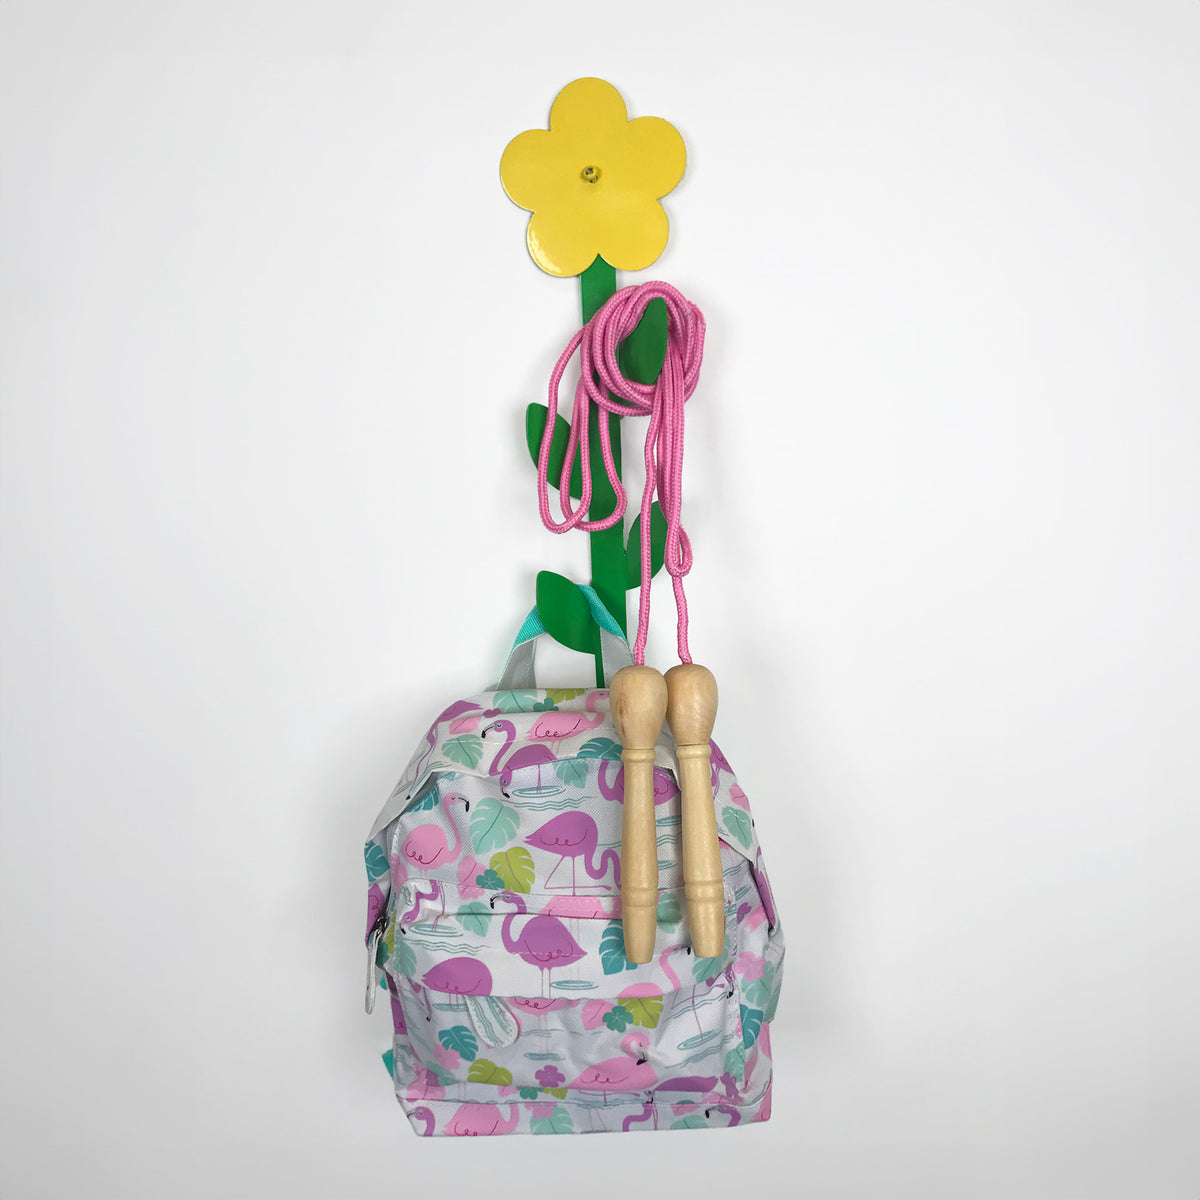 Coat Hook in the shape of a flower with a childrens rucksack and a skipping rope hanging from it.